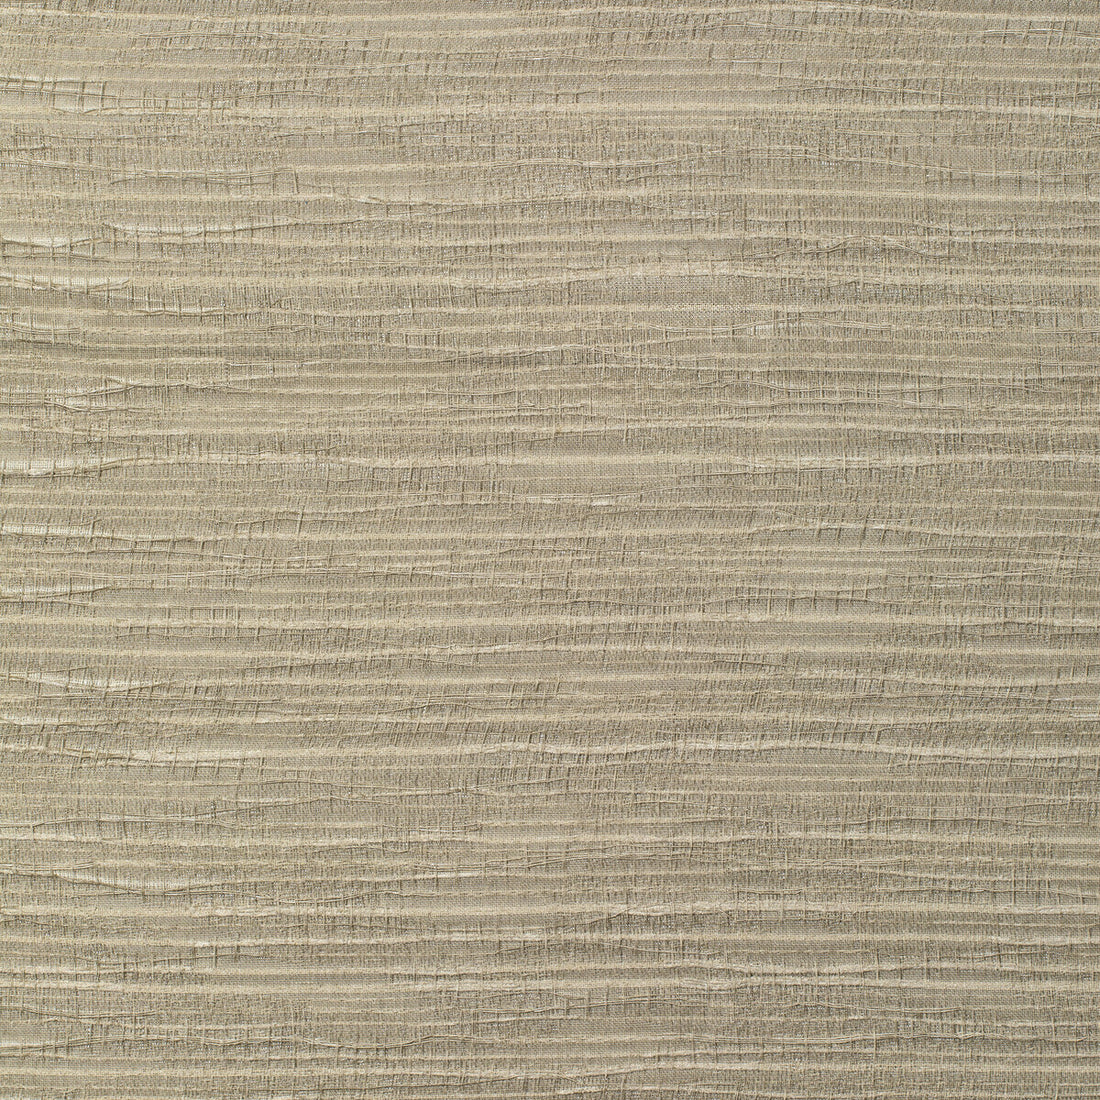 Bellasario fabric in sand color - pattern 4707.16.0 - by Kravet Couture in the Linherr Hollingsworth Boheme II collection